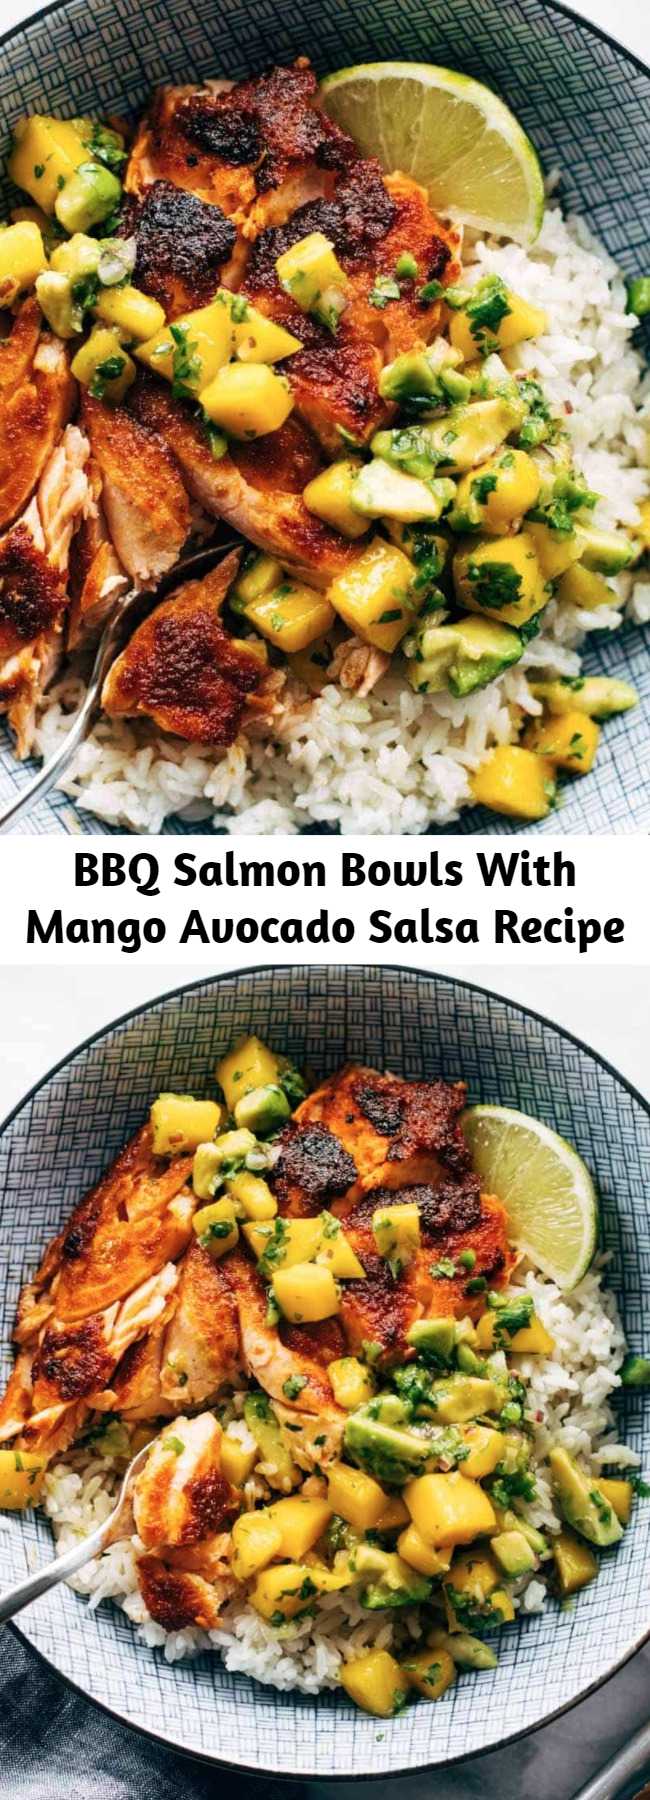 BBQ Salmon Bowls With Mango Avocado Salsa Recipe - BBQ Salmon Bowls with Mango Avocado Salsa! An easy and impressive dinner with yummy smoky-sweet flavor and a zip of zesty homemade salsa to take it over the top. The BEST weeknight dinner. #salmon #dinner #seafood #bbq